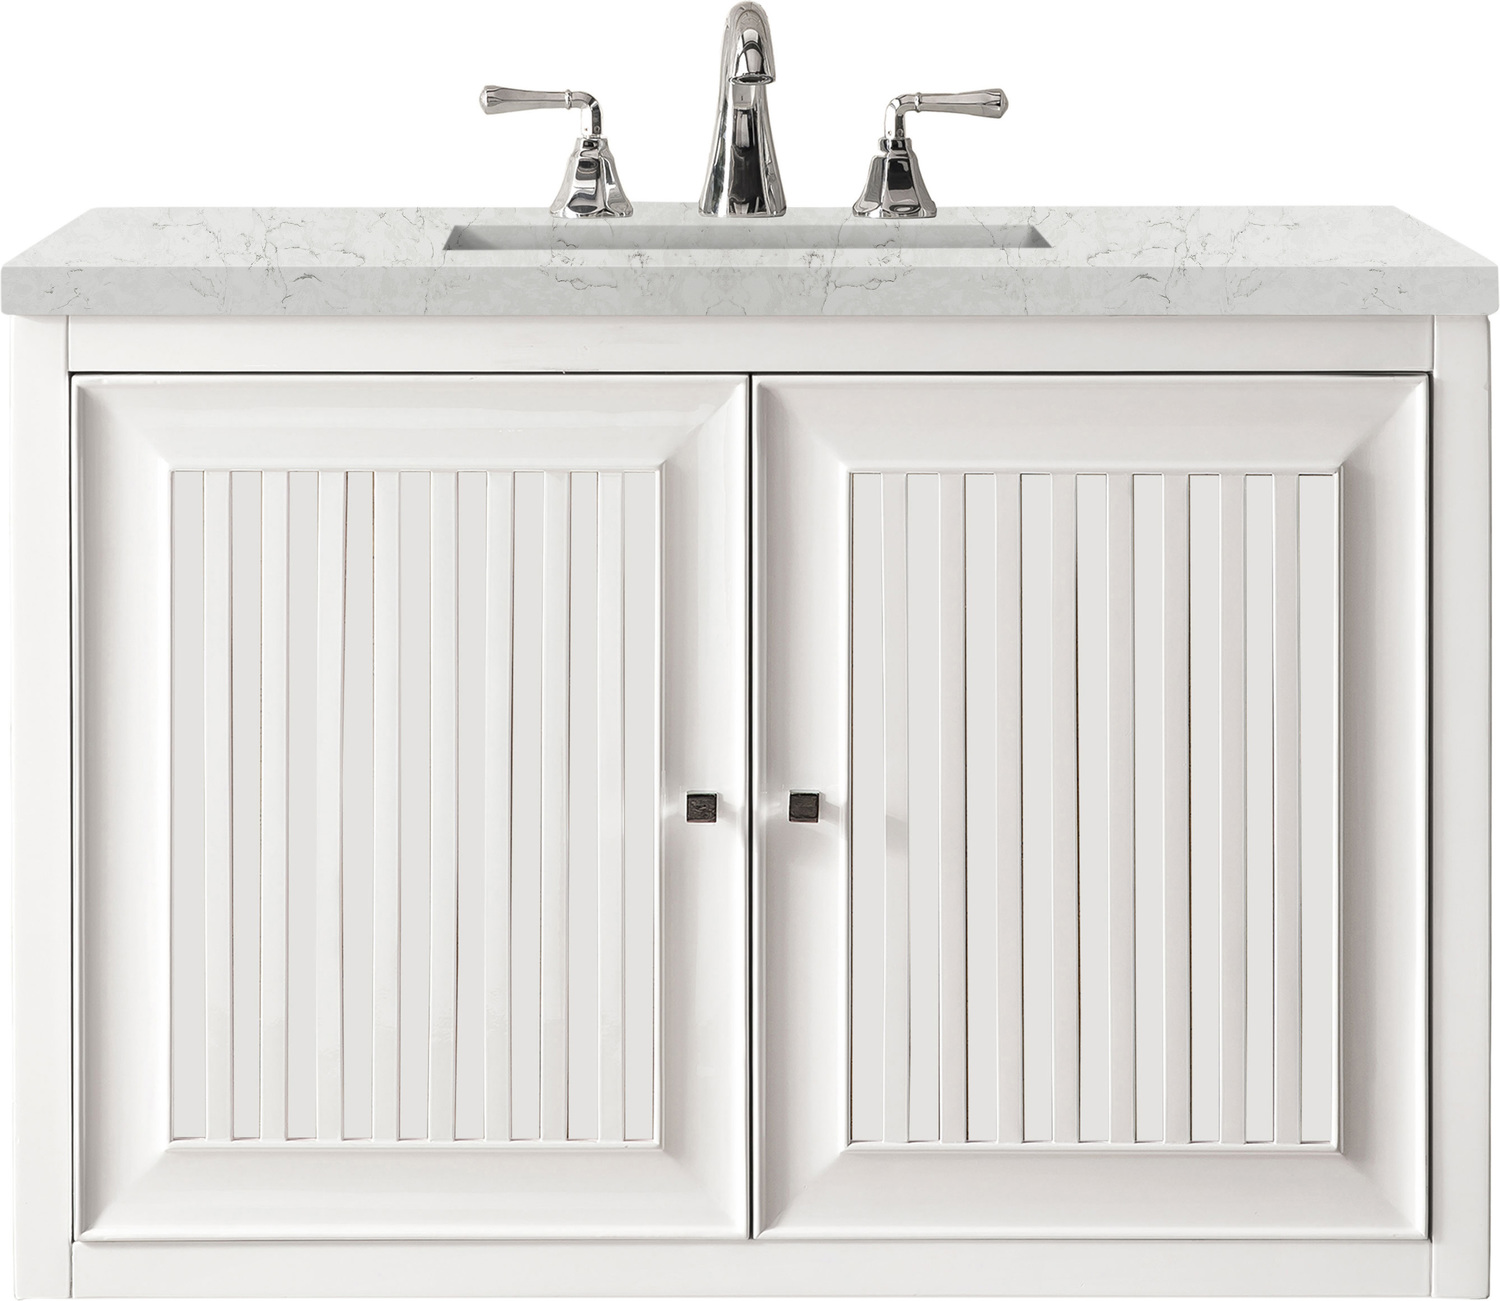 double vanity with storage James Martin Vanity Glossy White Traditional